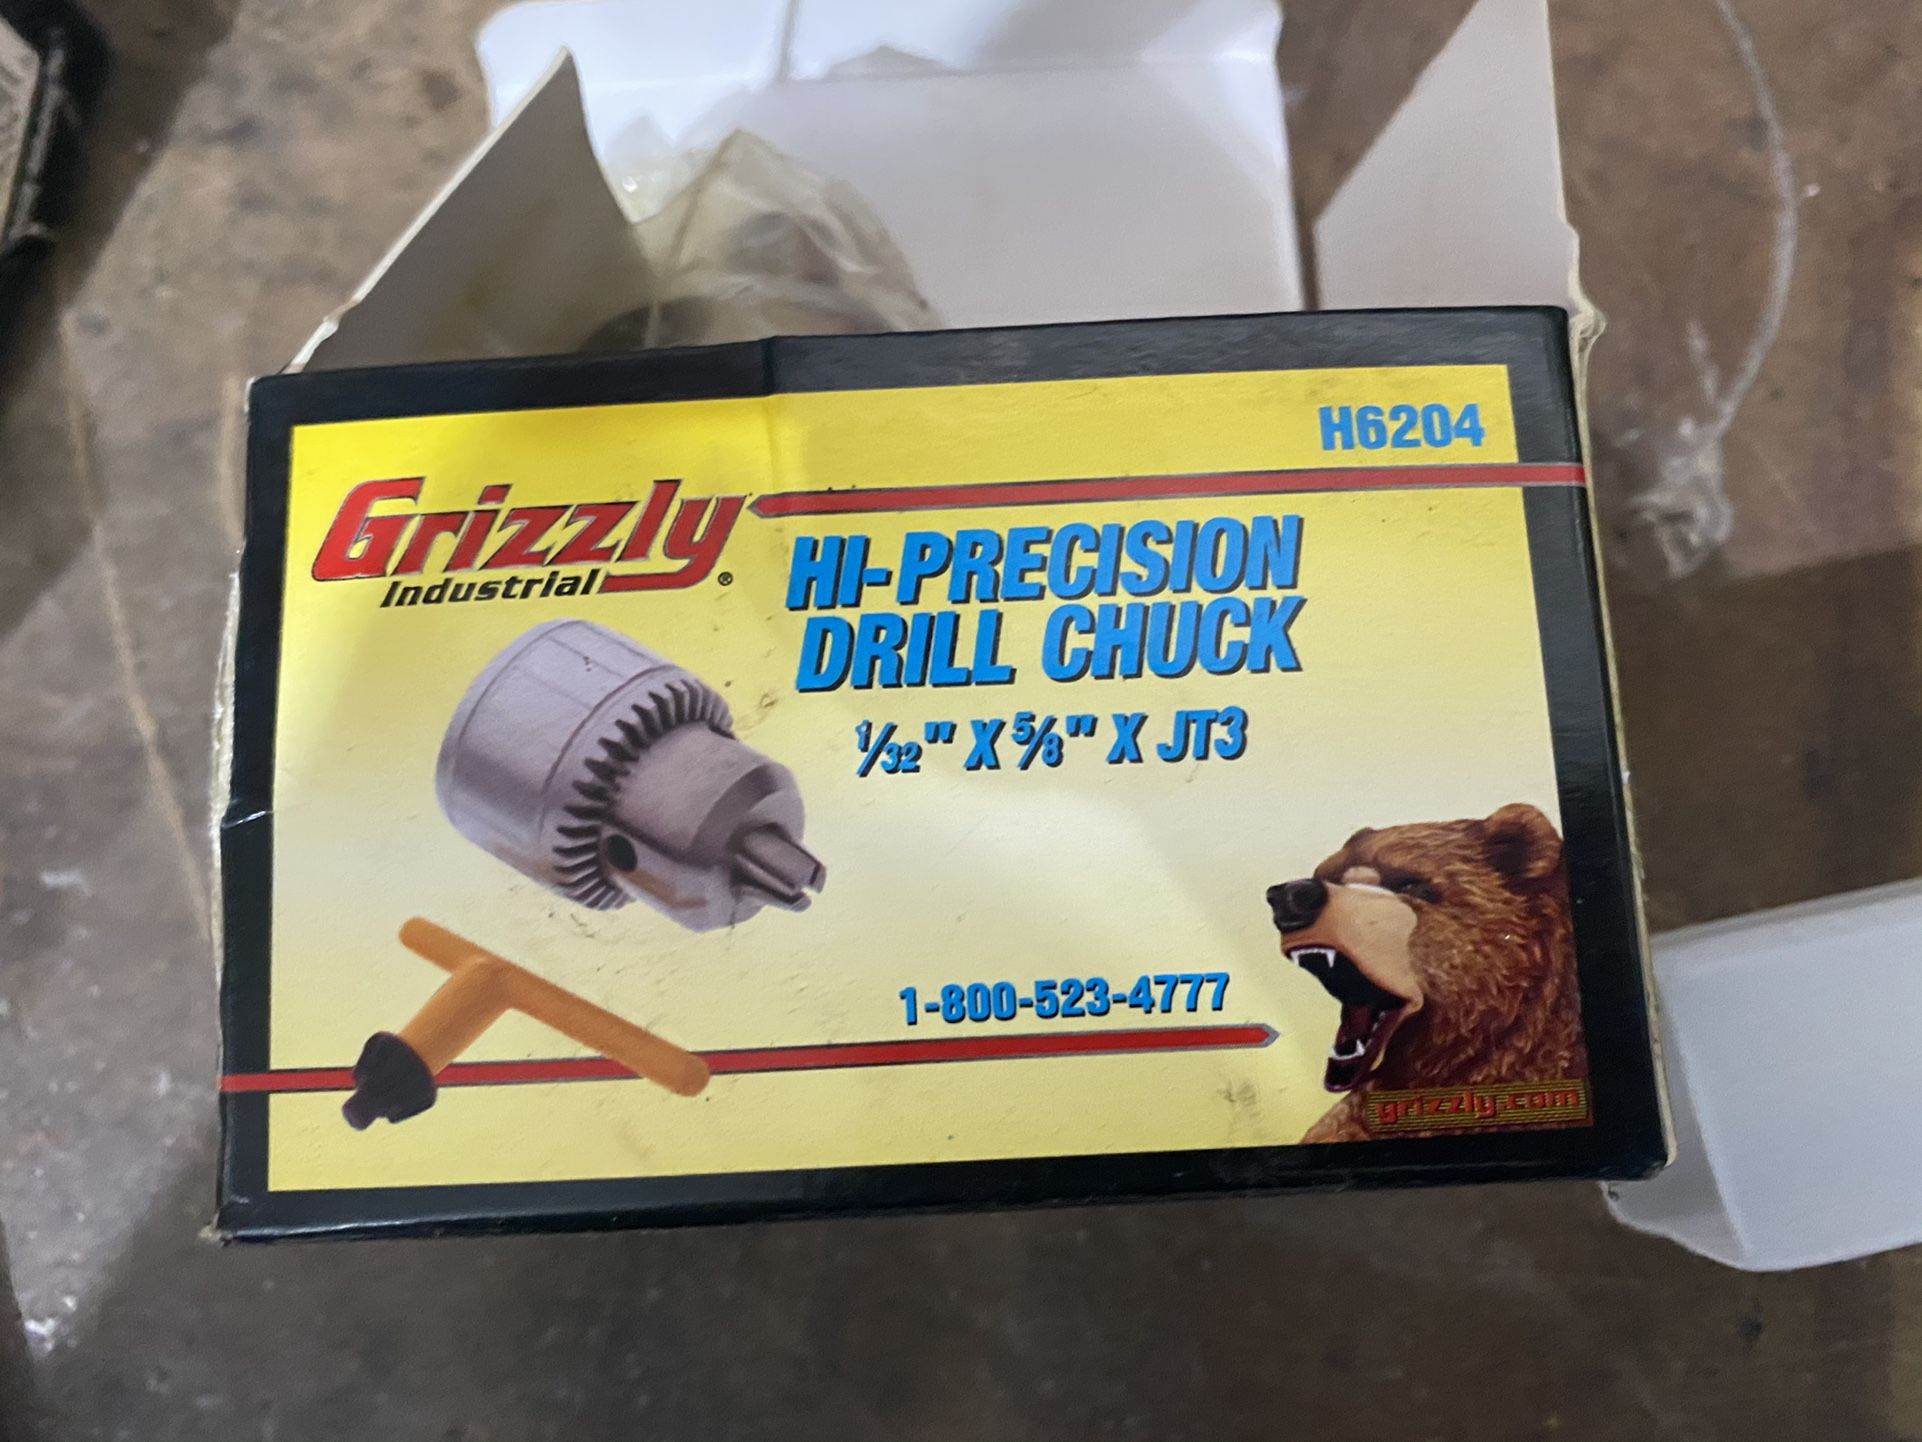 Grizzly Industrial High Precision Drill Chuck And MT3 Tang End Drill Chuck